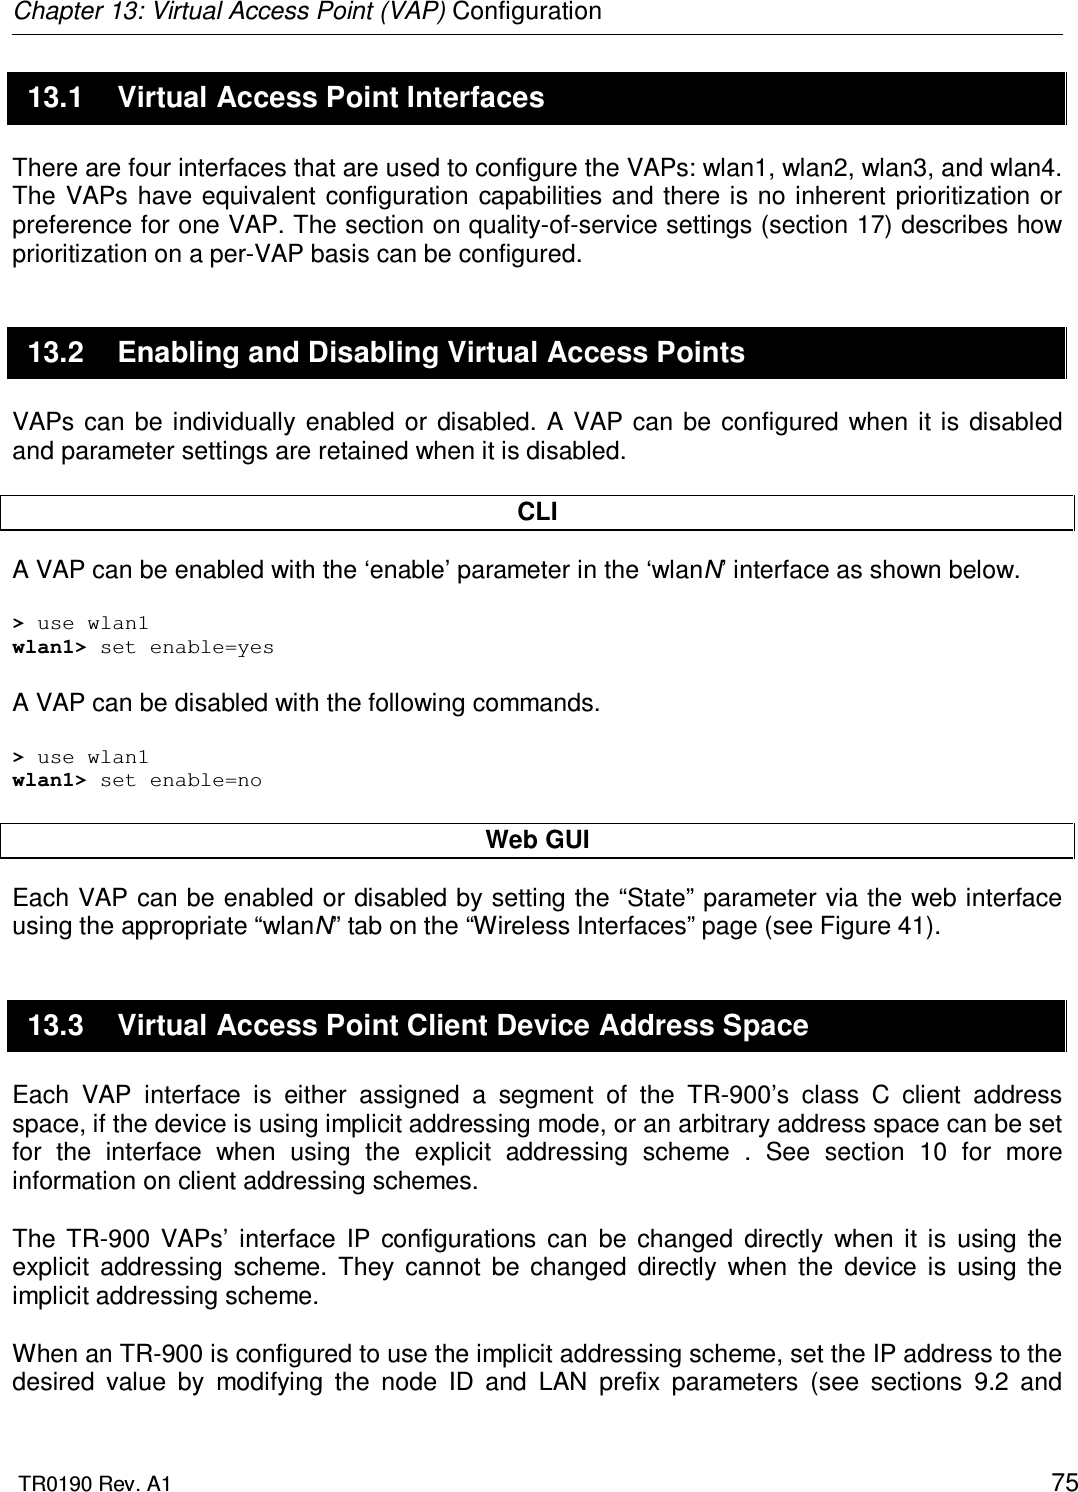 Chapter 13: Virtual Access Point (VAP) Configuration  TR0190 Rev. A1    75 13.1  Virtual Access Point Interfaces There are four interfaces that are used to configure the VAPs: wlan1, wlan2, wlan3, and wlan4. The  VAPs have equivalent  configuration  capabilities and  there is  no inherent prioritization or preference for one VAP. The section on quality-of-service settings (section 17) describes how prioritization on a per-VAP basis can be configured. 13.2  Enabling and Disabling Virtual Access Points VAPs  can  be individually  enabled  or disabled. A  VAP can be configured  when  it  is  disabled and parameter settings are retained when it is disabled.  CLI A VAP can be enabled with the ‘enable’ parameter in the ‘wlanN’ interface as shown below.  &gt; use wlan1 wlan1&gt; set enable=yes  A VAP can be disabled with the following commands.  &gt; use wlan1 wlan1&gt; set enable=no  Web GUI Each VAP can be enabled or disabled by setting the “State” parameter via the web interface using the appropriate “wlanN” tab on the “Wireless Interfaces” page (see Figure 41).  13.3  Virtual Access Point Client Device Address Space Each  VAP  interface  is  either  assigned  a  segment  of  the  TR-900’s  class  C  client  address space, if the device is using implicit addressing mode, or an arbitrary address space can be set for  the  interface  when  using  the  explicit  addressing  scheme  .  See  section  10  for  more information on client addressing schemes.  The  TR-900  VAPs’  interface  IP  configurations  can  be  changed  directly  when  it  is  using  the explicit  addressing  scheme.  They  cannot  be  changed  directly  when  the  device  is  using  the implicit addressing scheme.   When an TR-900 is configured to use the implicit addressing scheme, set the IP address to the desired  value  by  modifying  the  node  ID  and  LAN  prefix  parameters  (see  sections  9.2  and 